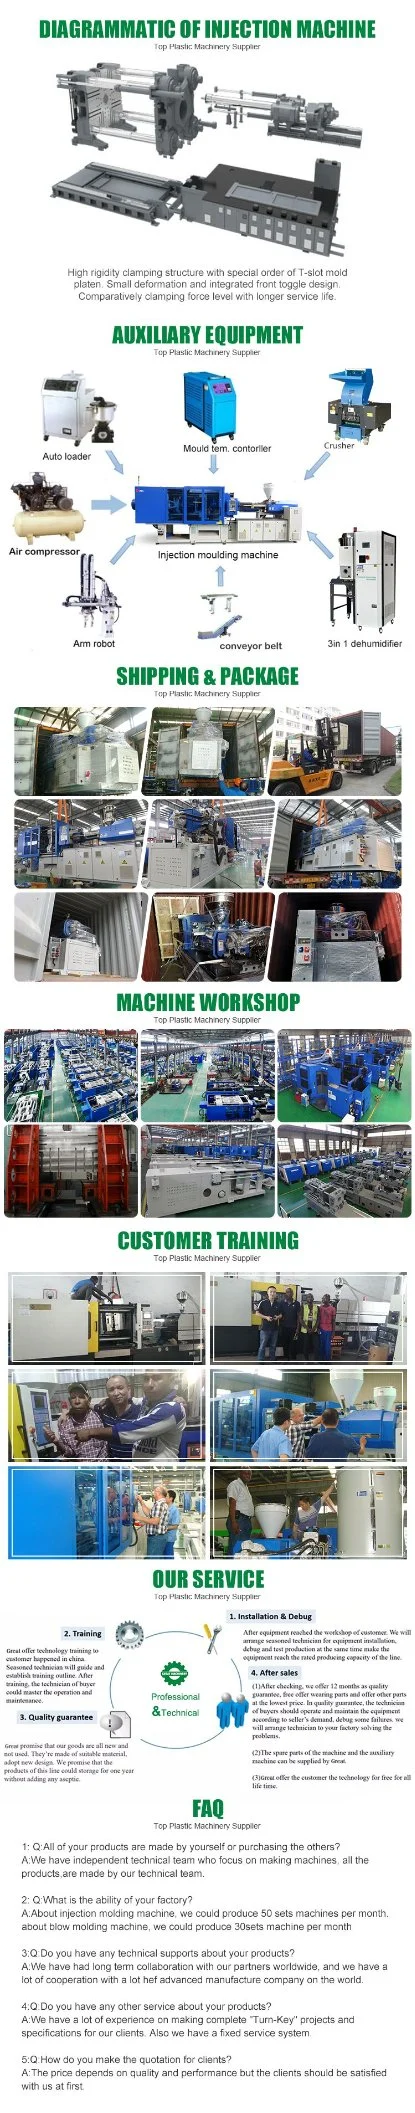 Great Price Fully Automatic Plastic PP, PE, ABS Injection Molding Machine